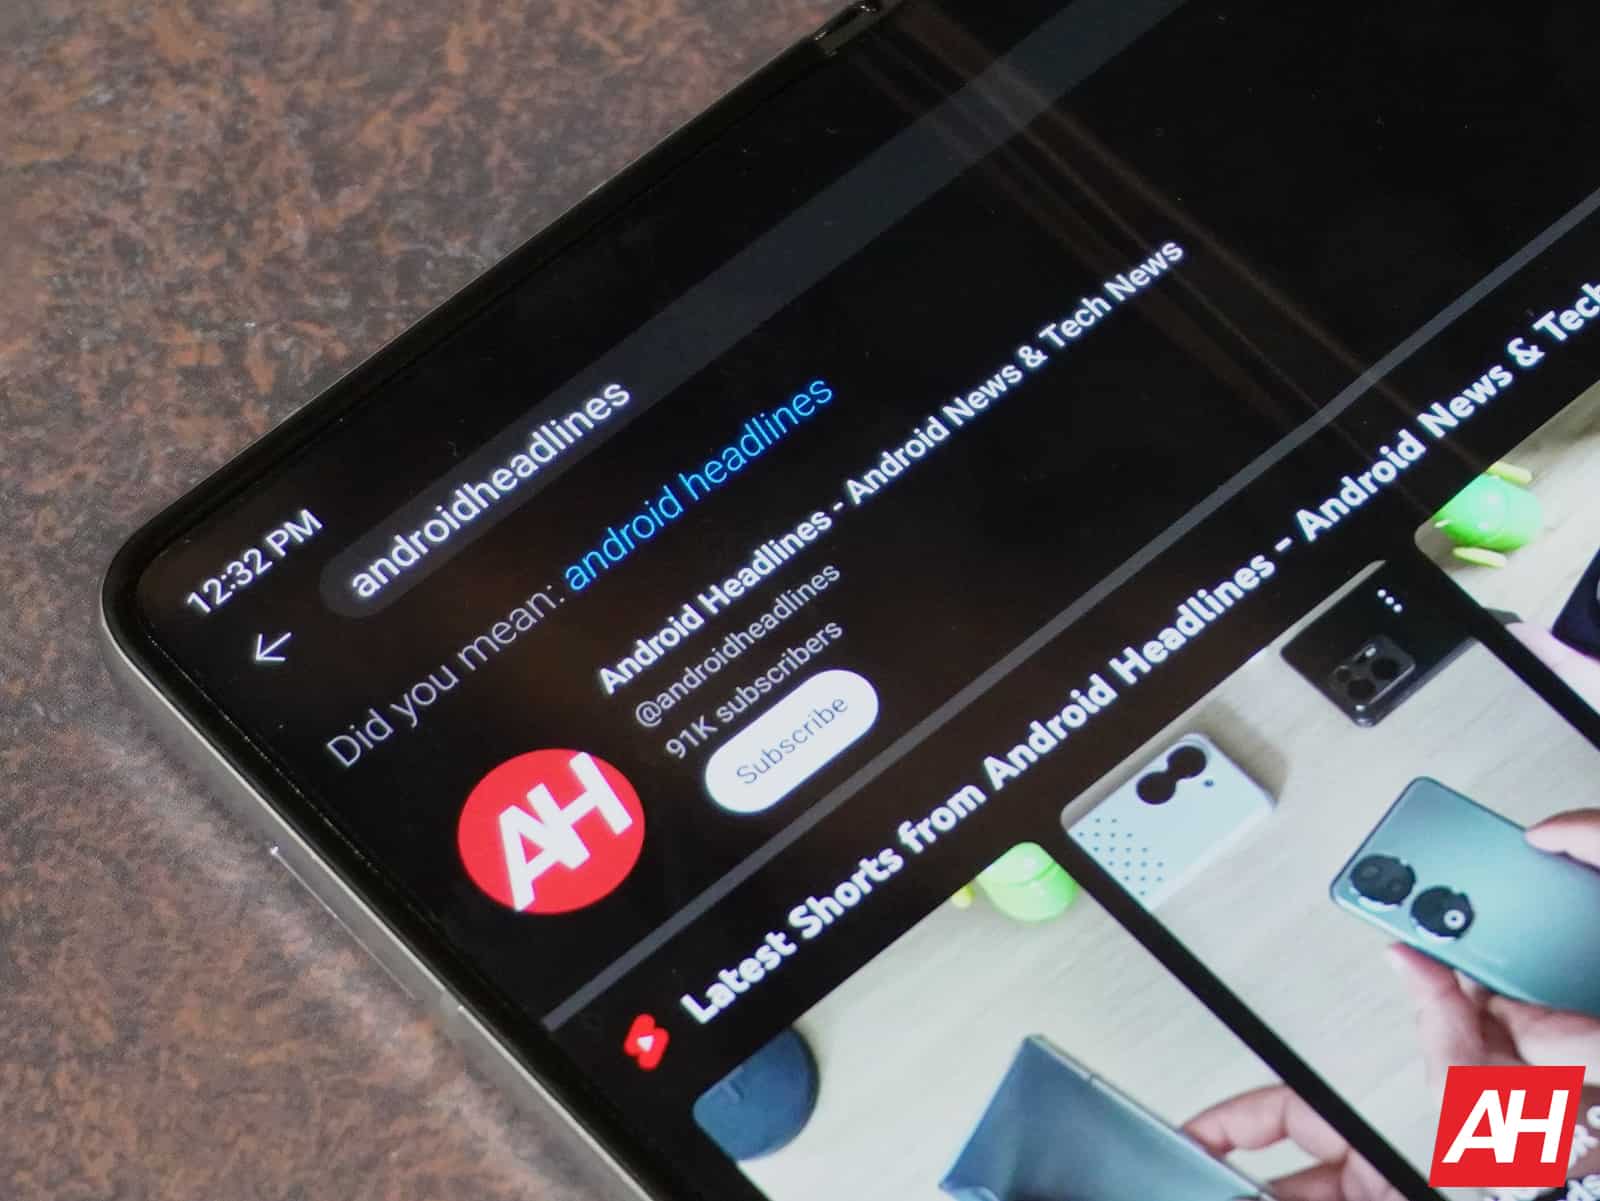 YouTube app for Android TV gets “stable volume” feature.